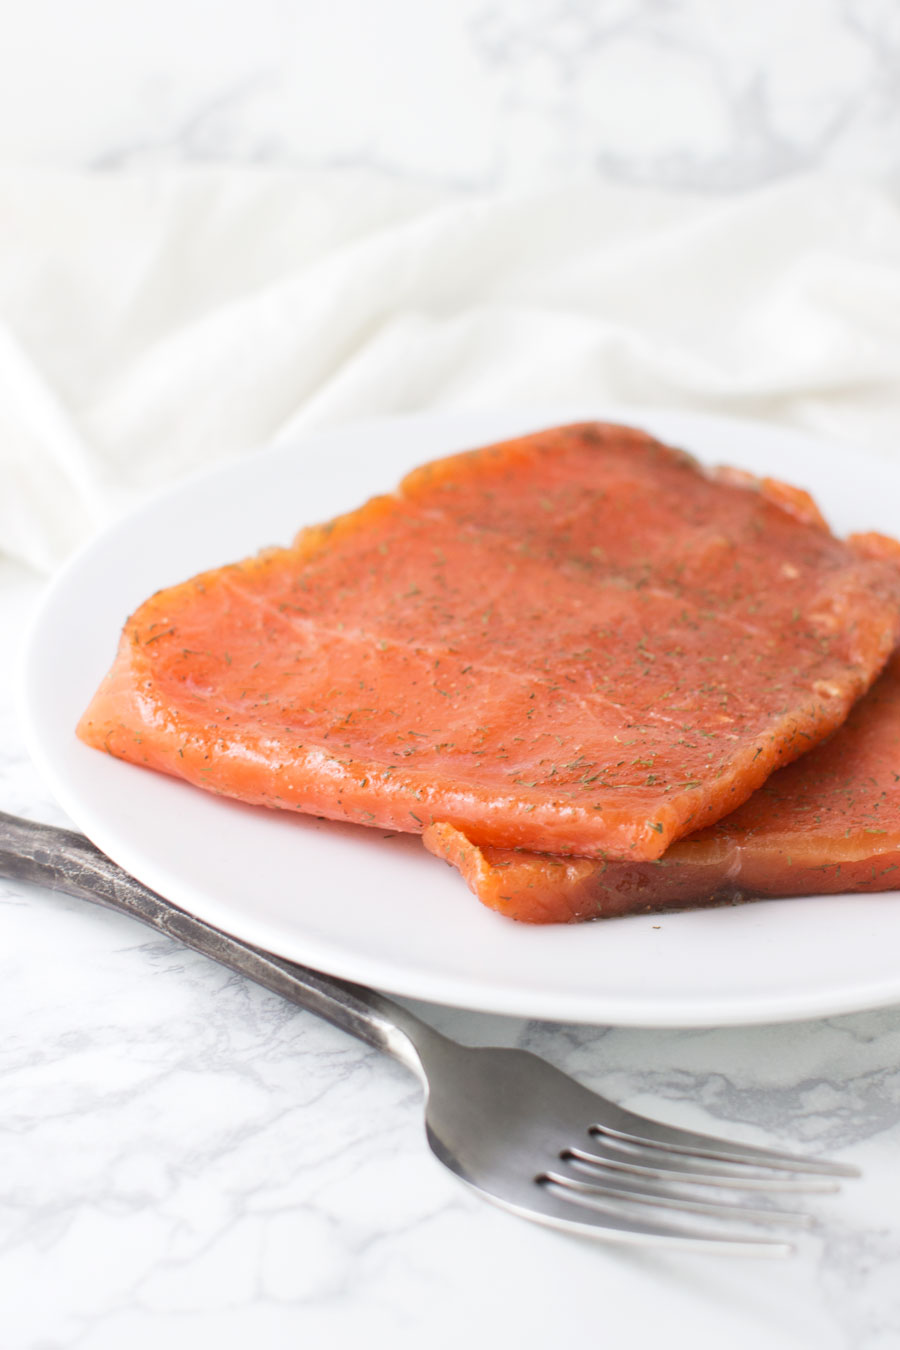 Cured Salmon recipe from acleanplate.com #paleo #aip #glutenfree